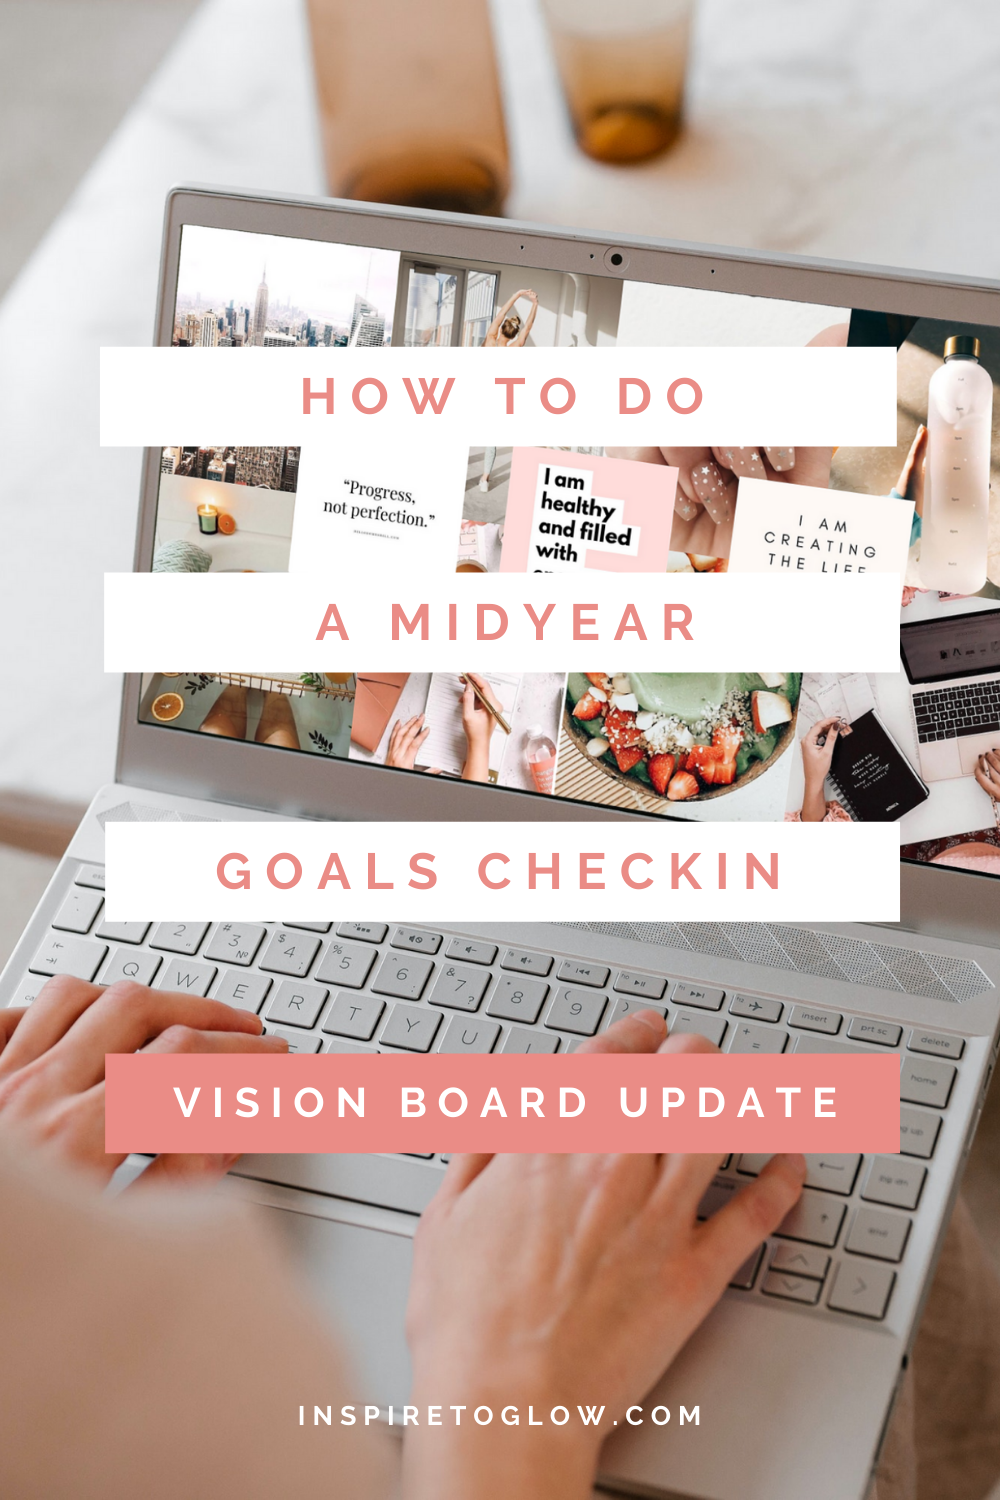 Pinterest Pin Blog Post - How to do a midyear goals checkin - vision board update - goalsetting & productivity